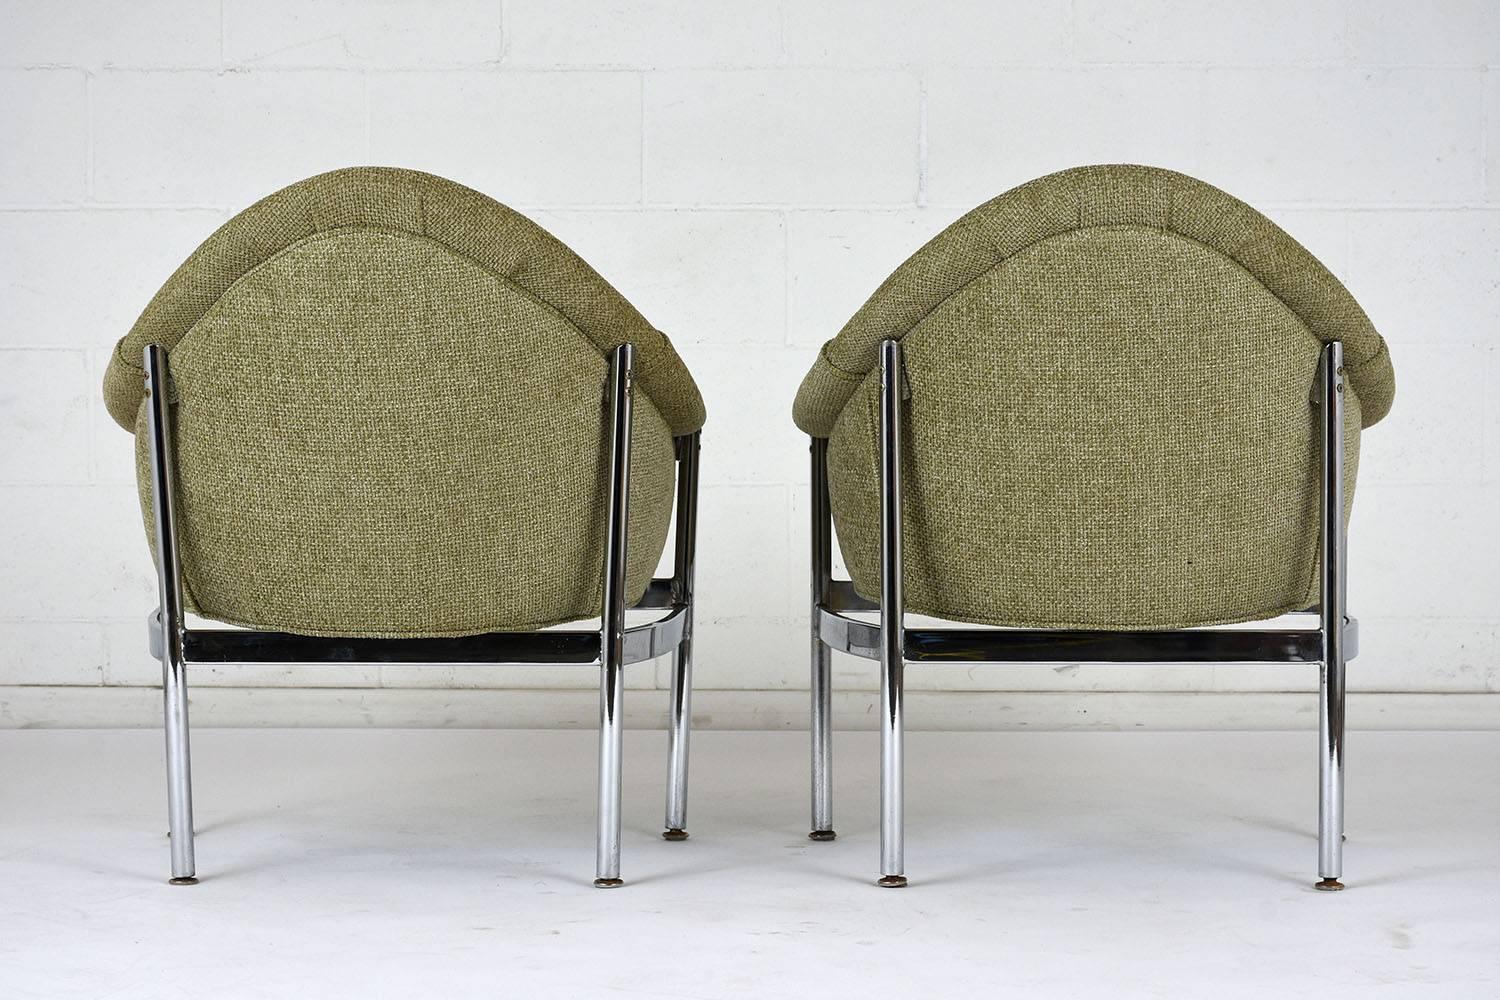 Polished Pair of Mid-Century Modern Lounge Chairs